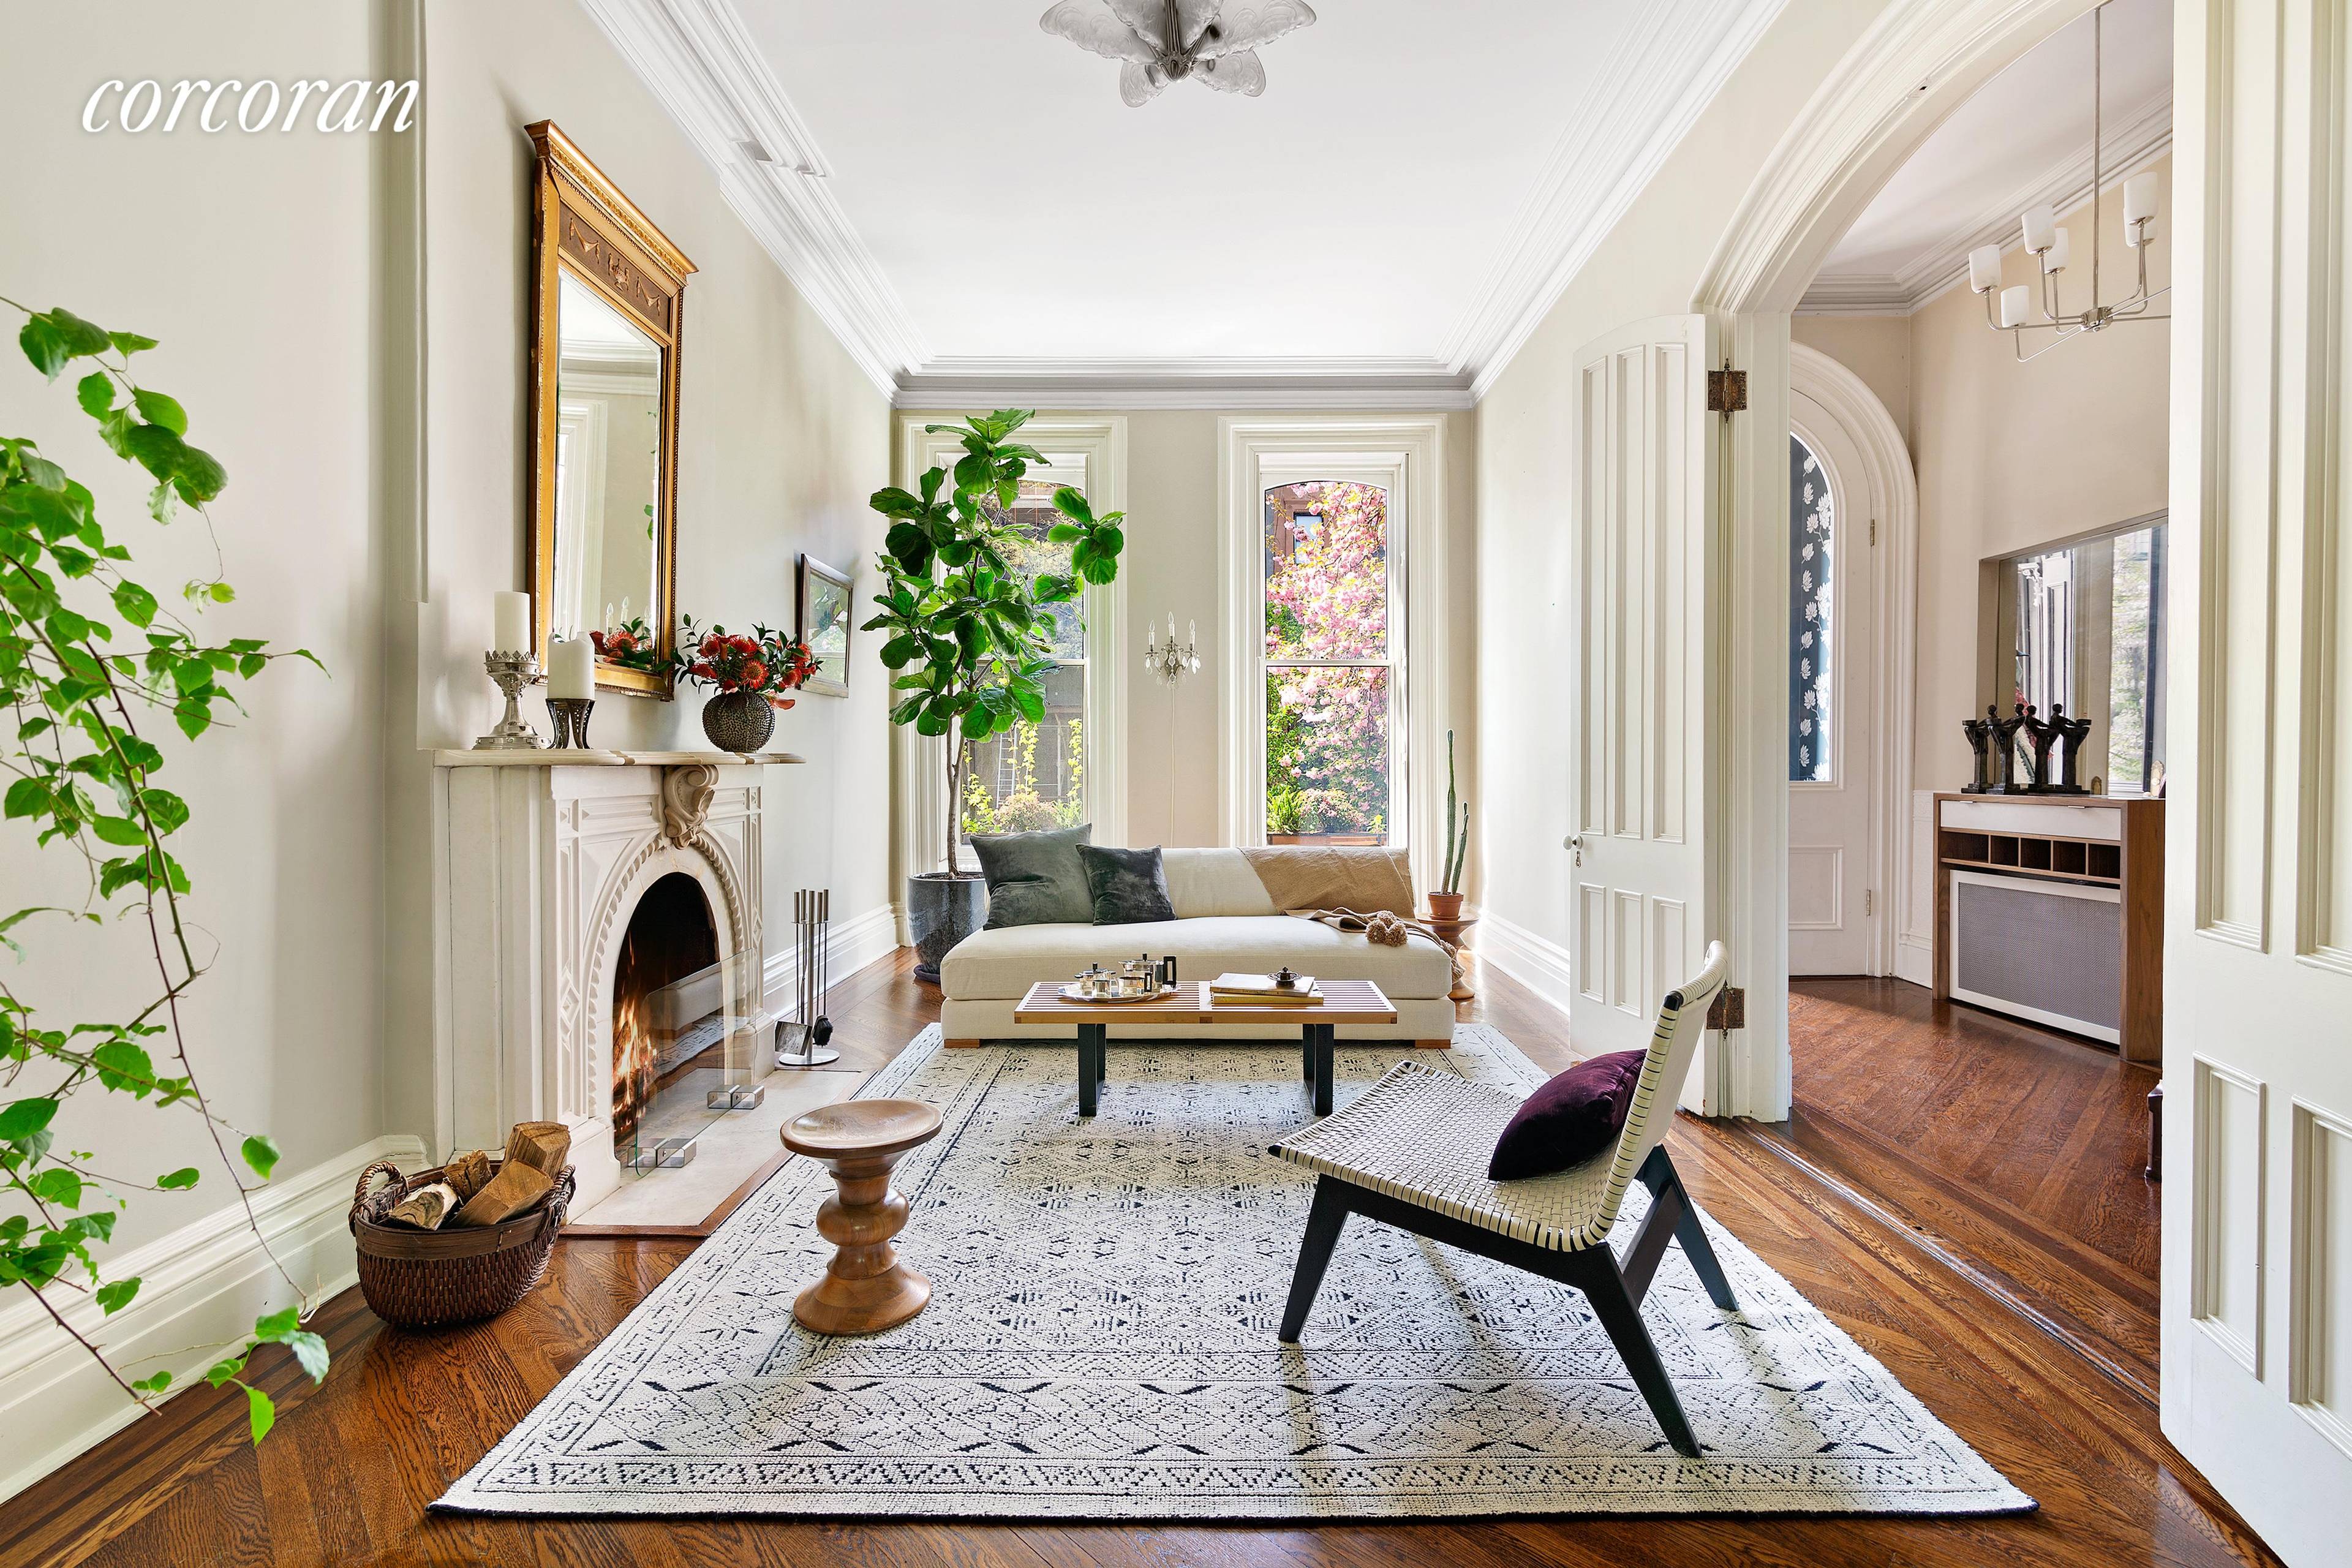 On one of north Park Slope's loveliest blocks sits this exquisitely renovated, 20 foot wide, two family, four story brownstone.